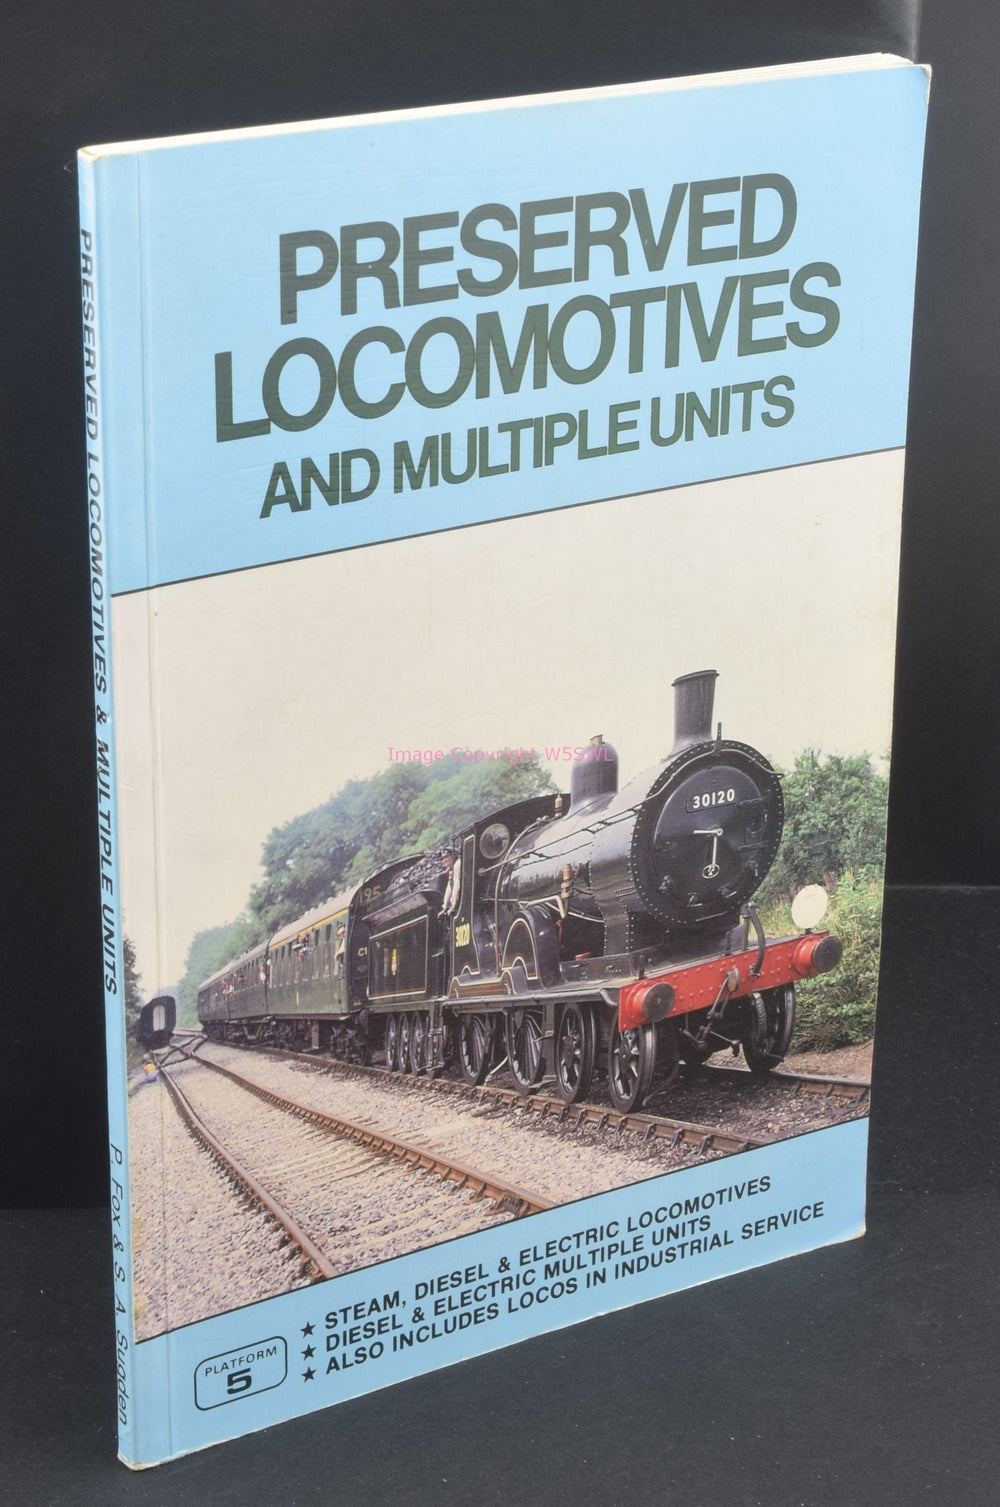 Preserved Locomotives and Multiple Units 2nd Ed - Dave's Hobby Shop by W5SWL